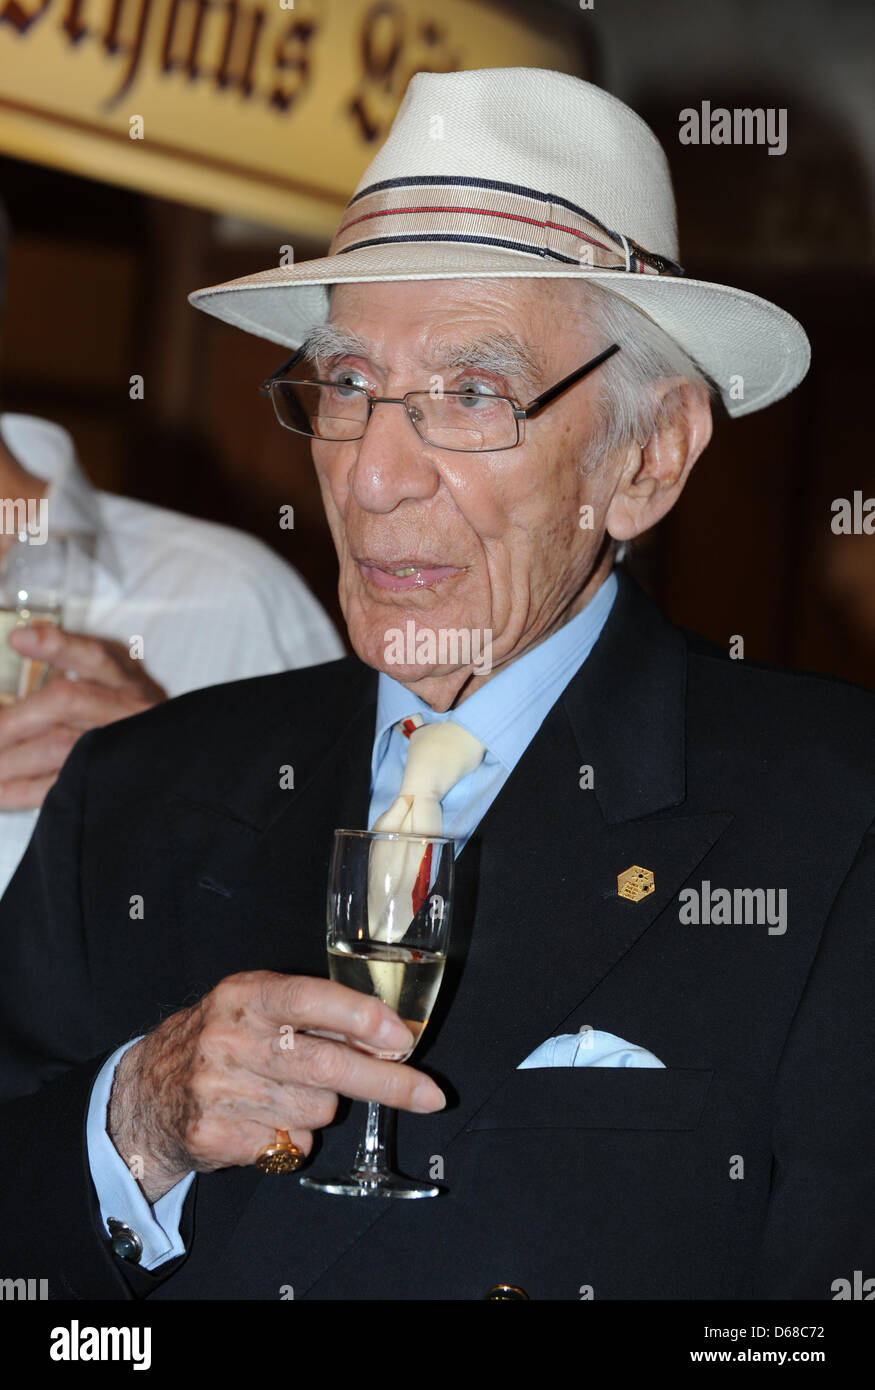 Swiss actor Lukas Ammann is pictured in Baden-Baden, Germany, 10 July 2012. Ammann will celebrate his 100th birthday in 2012. Between 1994 and 2000 he portrayed the pater familias Franz Faller in the SWR television series 'Die Fallers'. Photo: Patrick Seeger Stock Photo